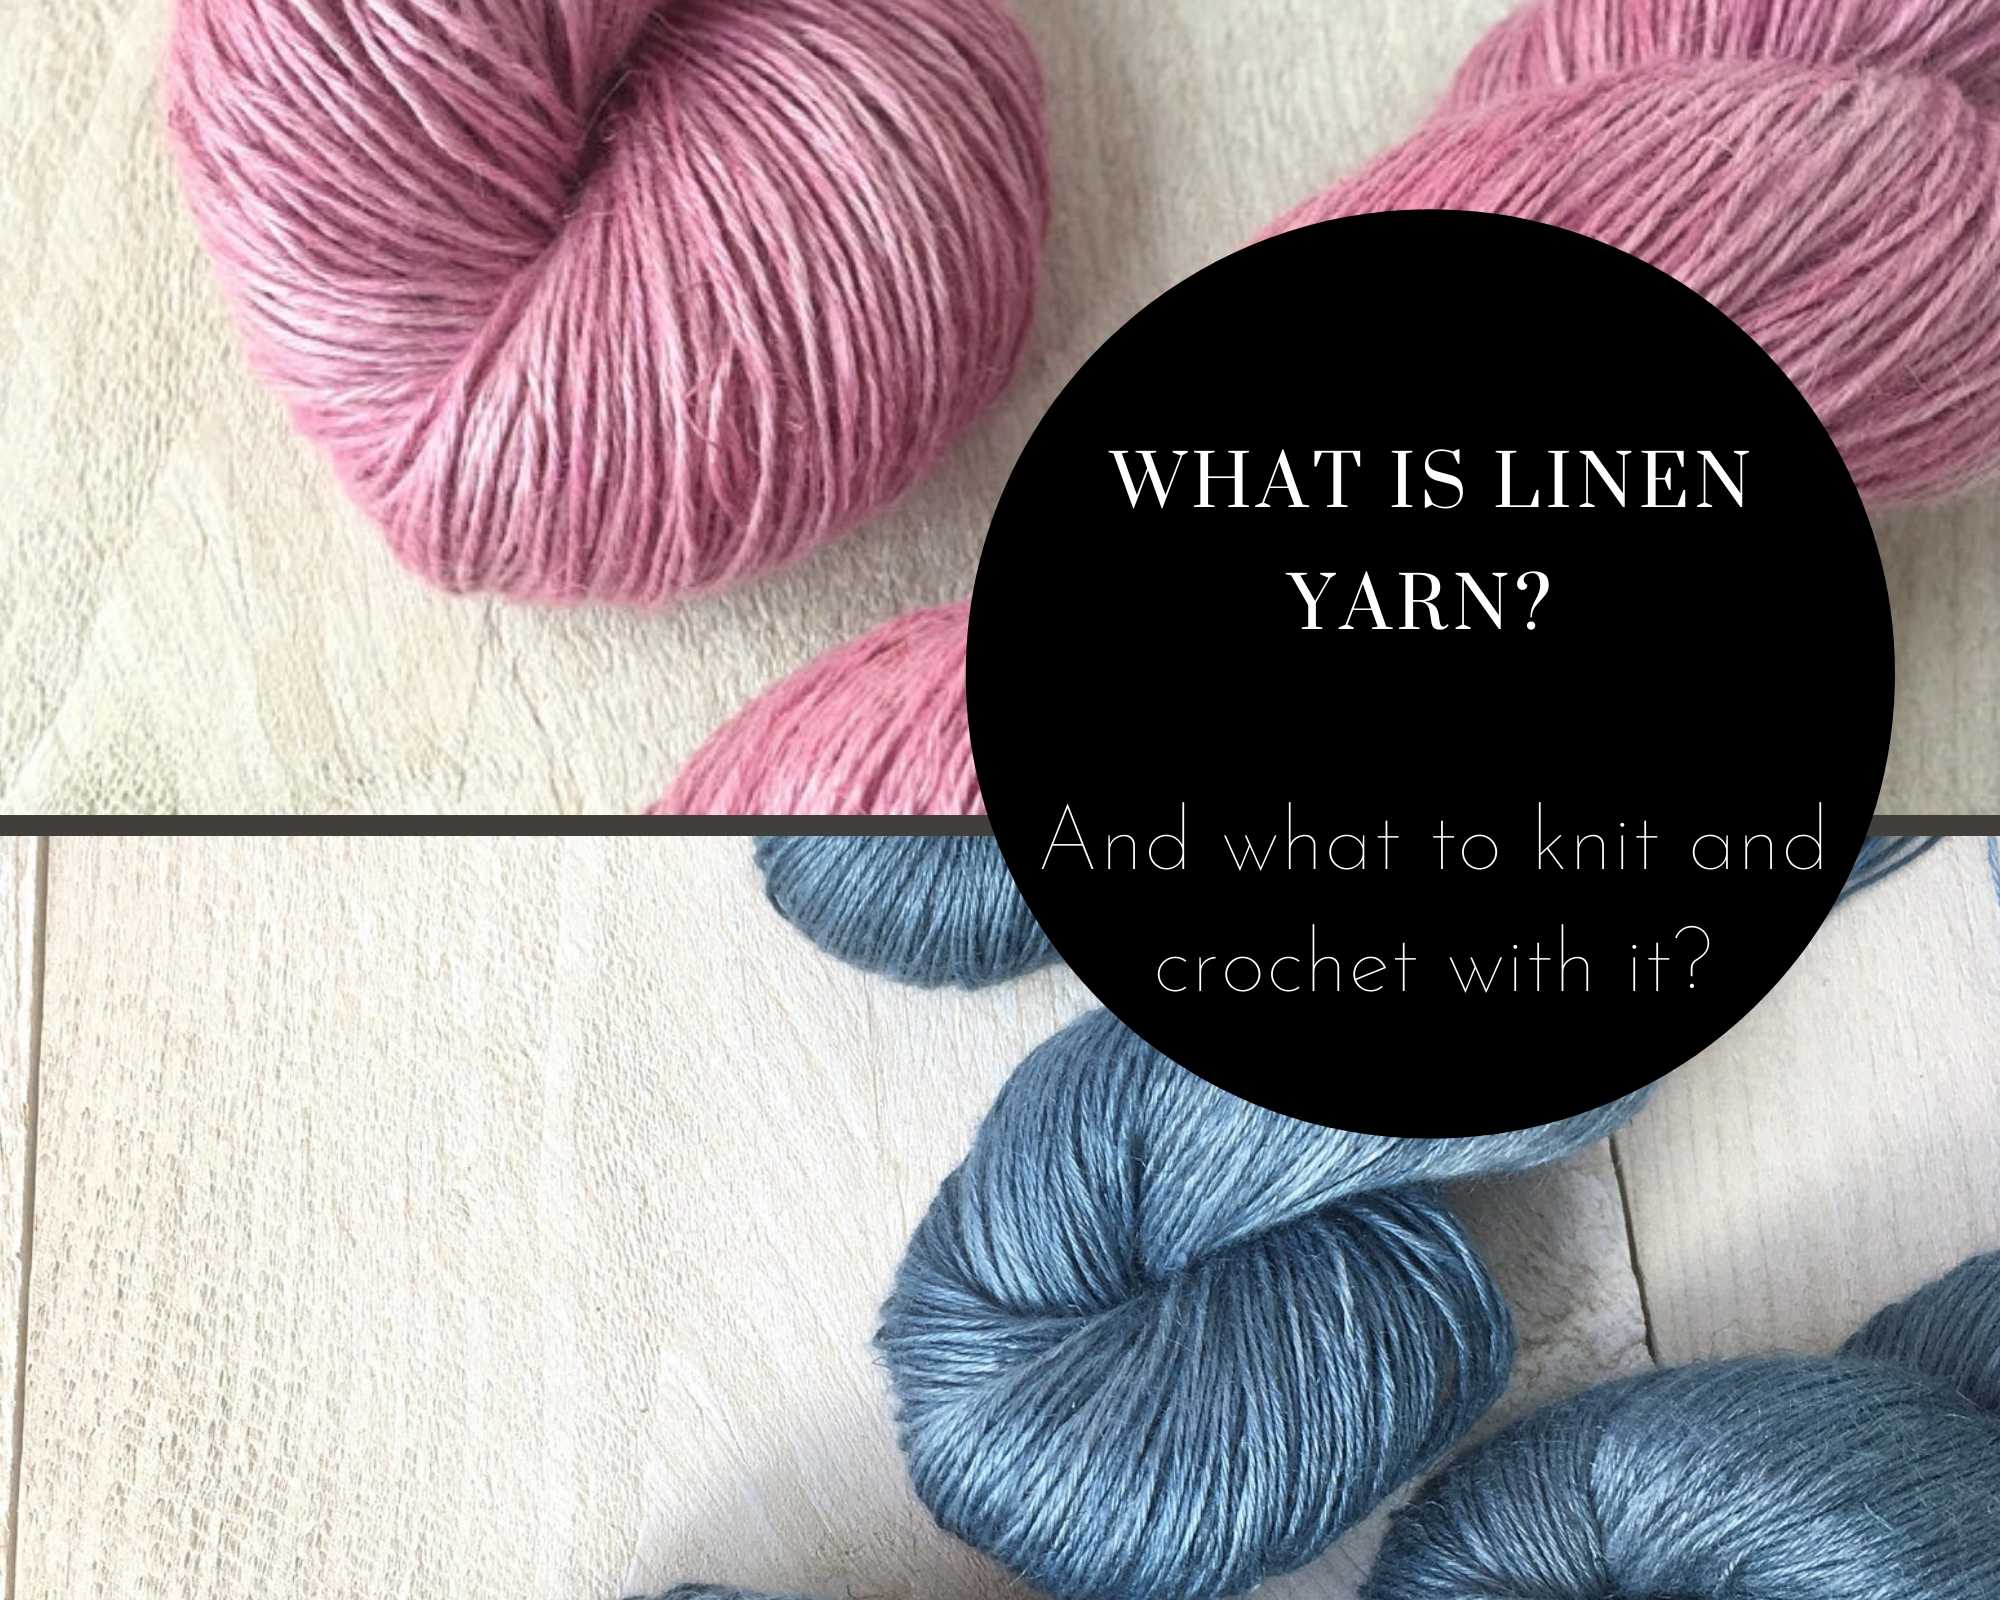 Knitting with linen yarn| The Fox and The Knight